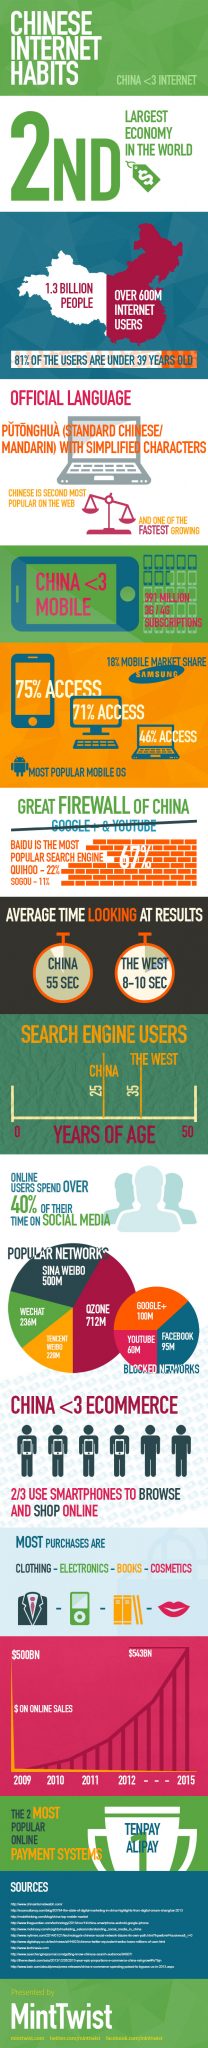 Digital_China_Internet_Habits_Infographic_by_MintTwist